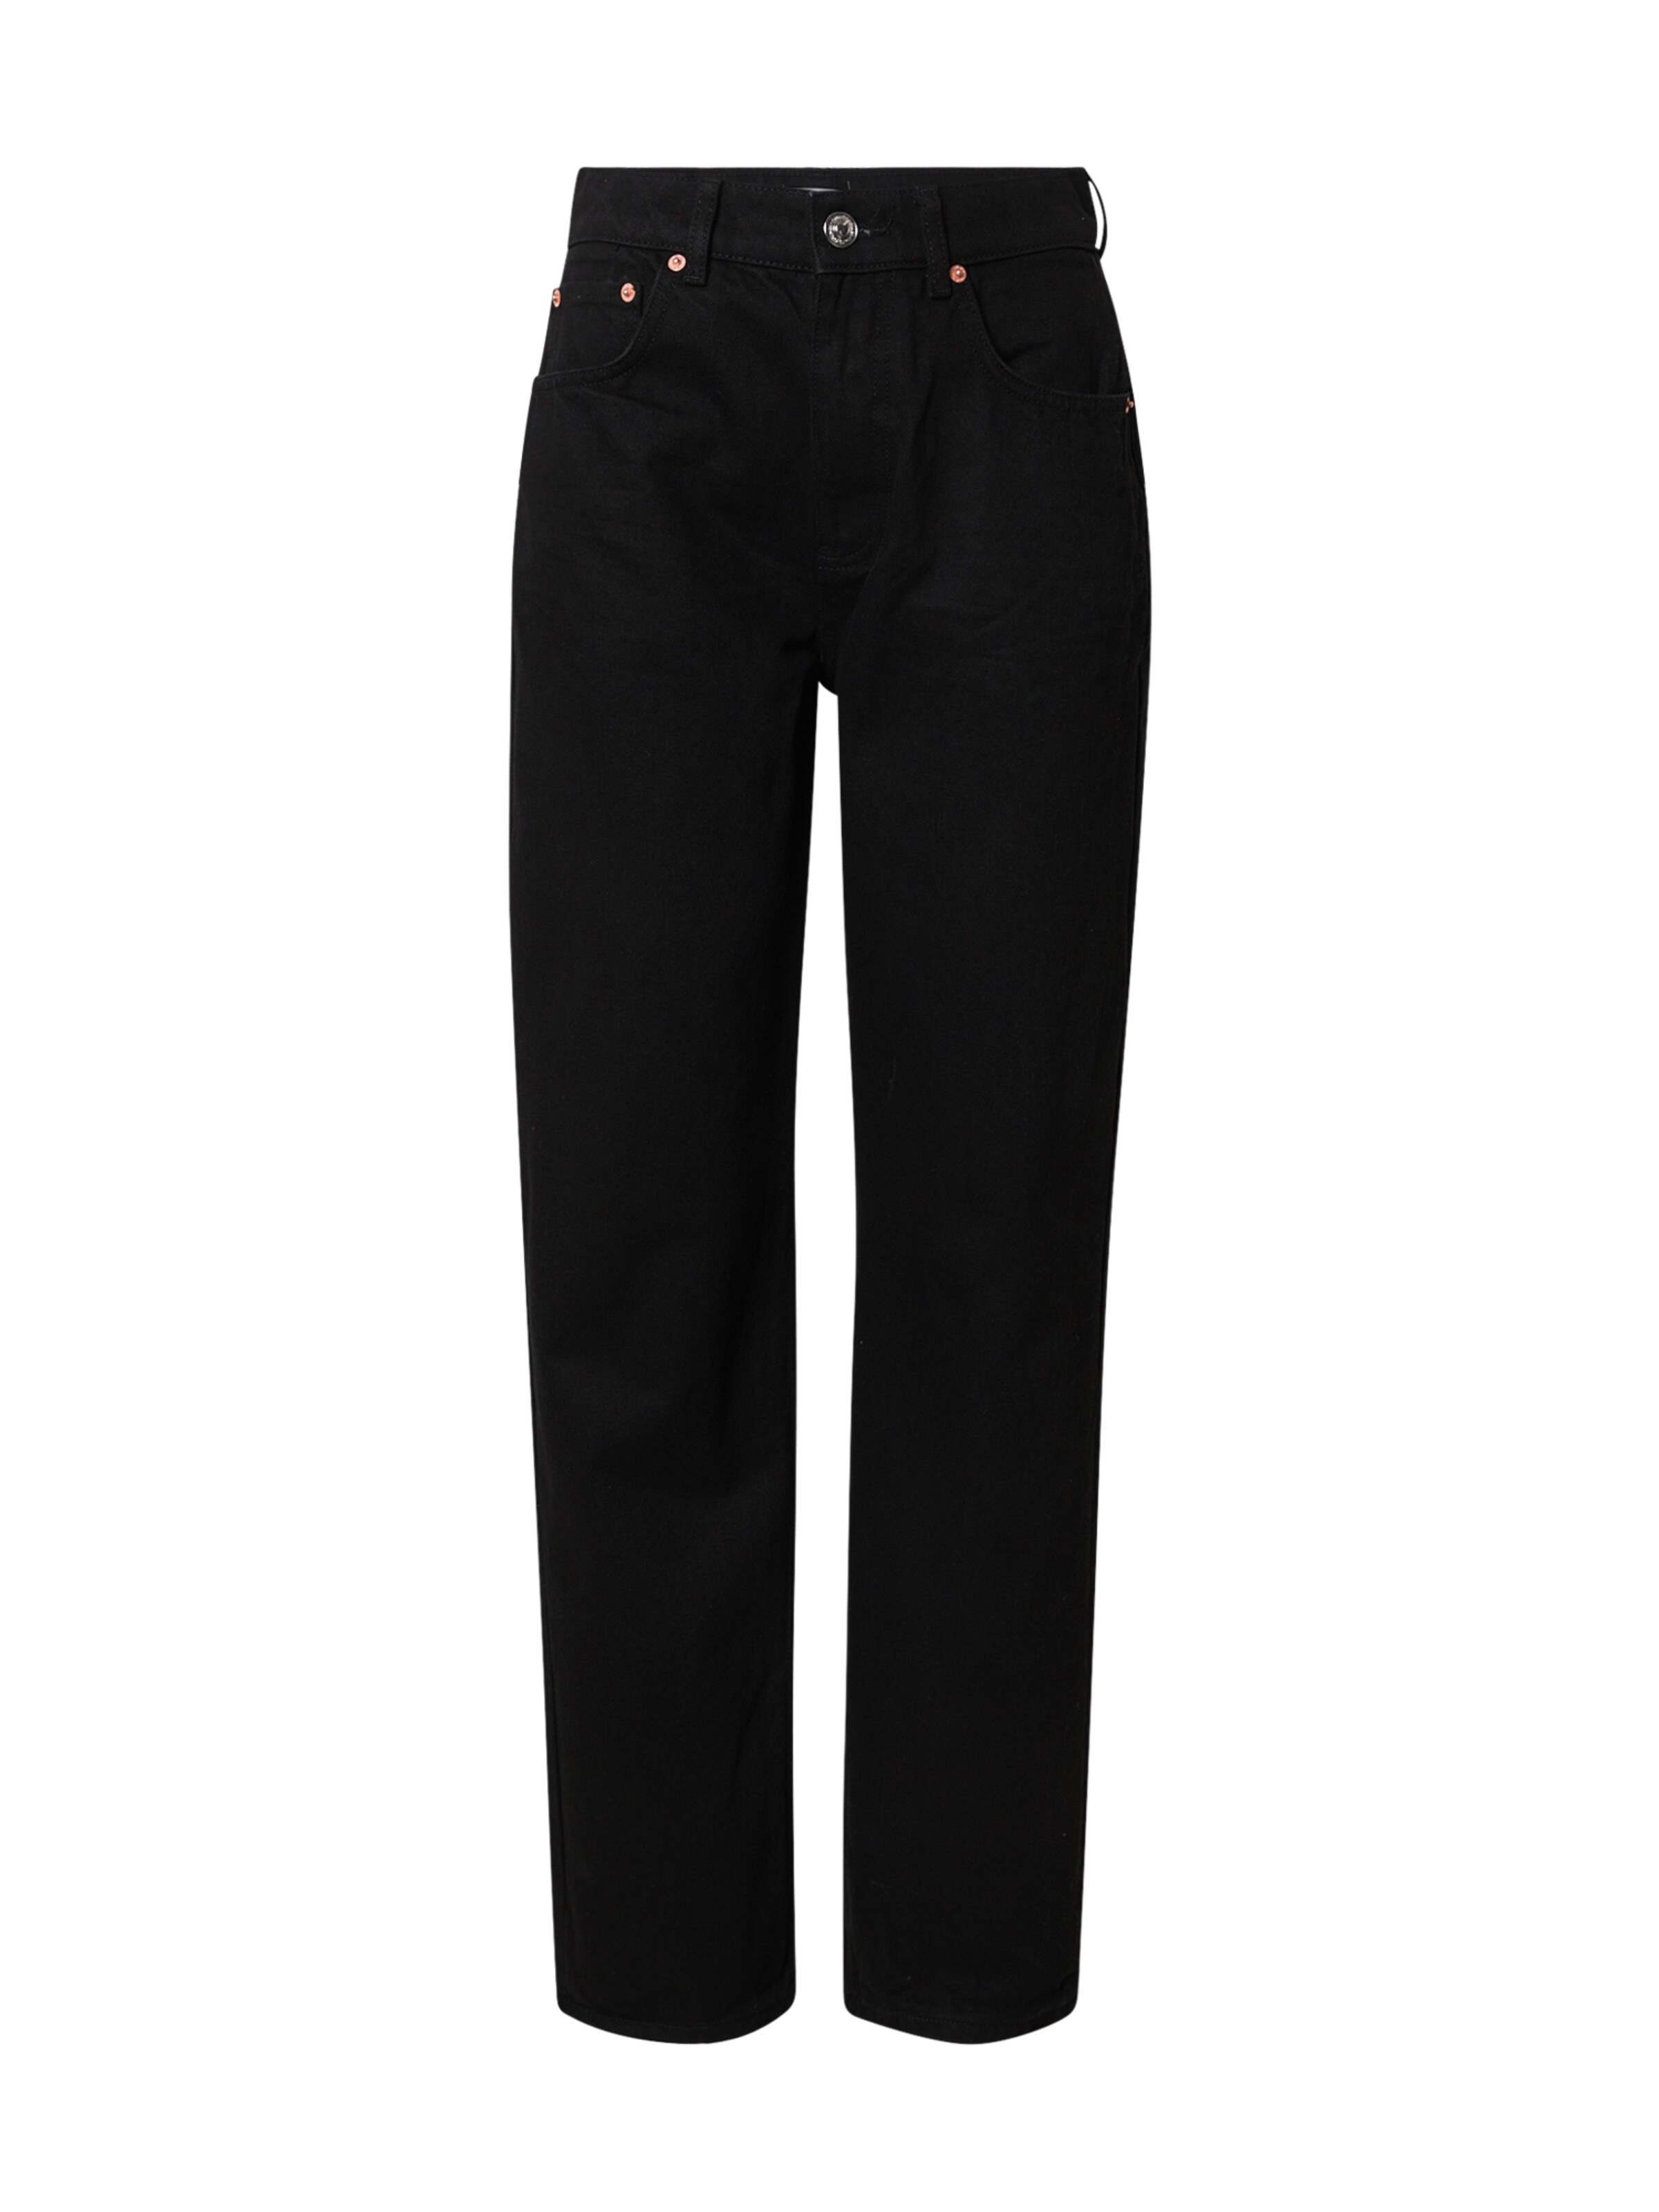 Jeans Donna Gina Tricot Jeans 90s in Nero 